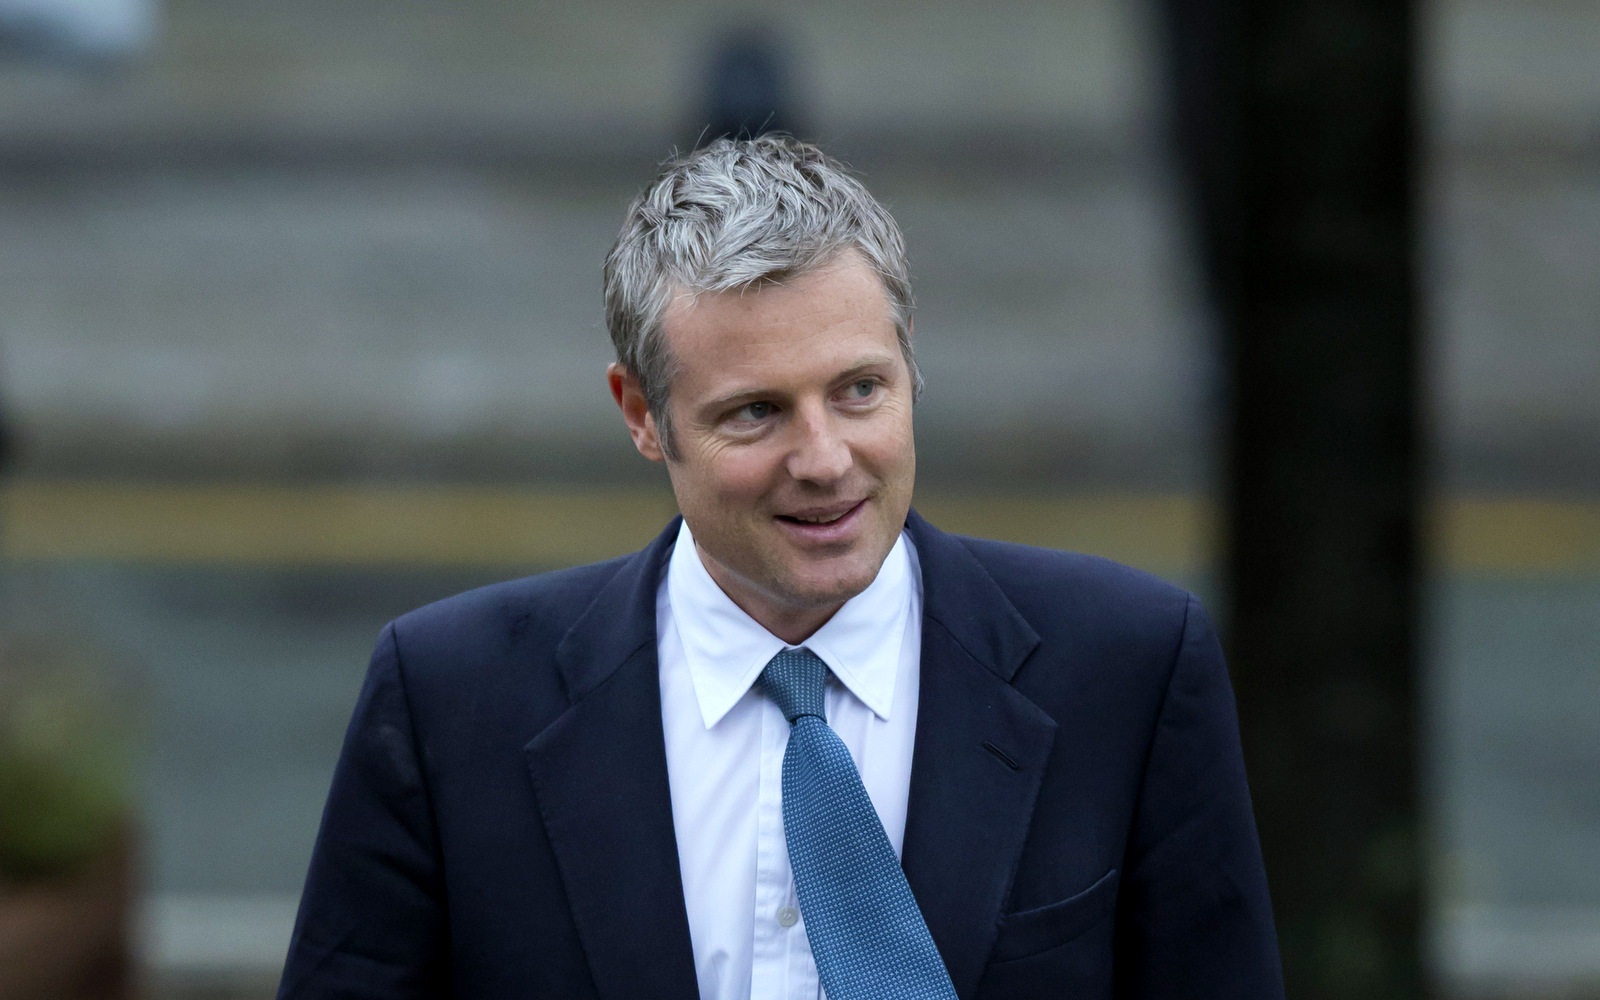 Zac Goldsmith makes his way to see Britain's Prime Minister David Cameron make his keynote speech at the annual Conservative Party Conference in Manchester, England, Wednesday Oct. 7, 2015. (AP Photo/Jon Super)